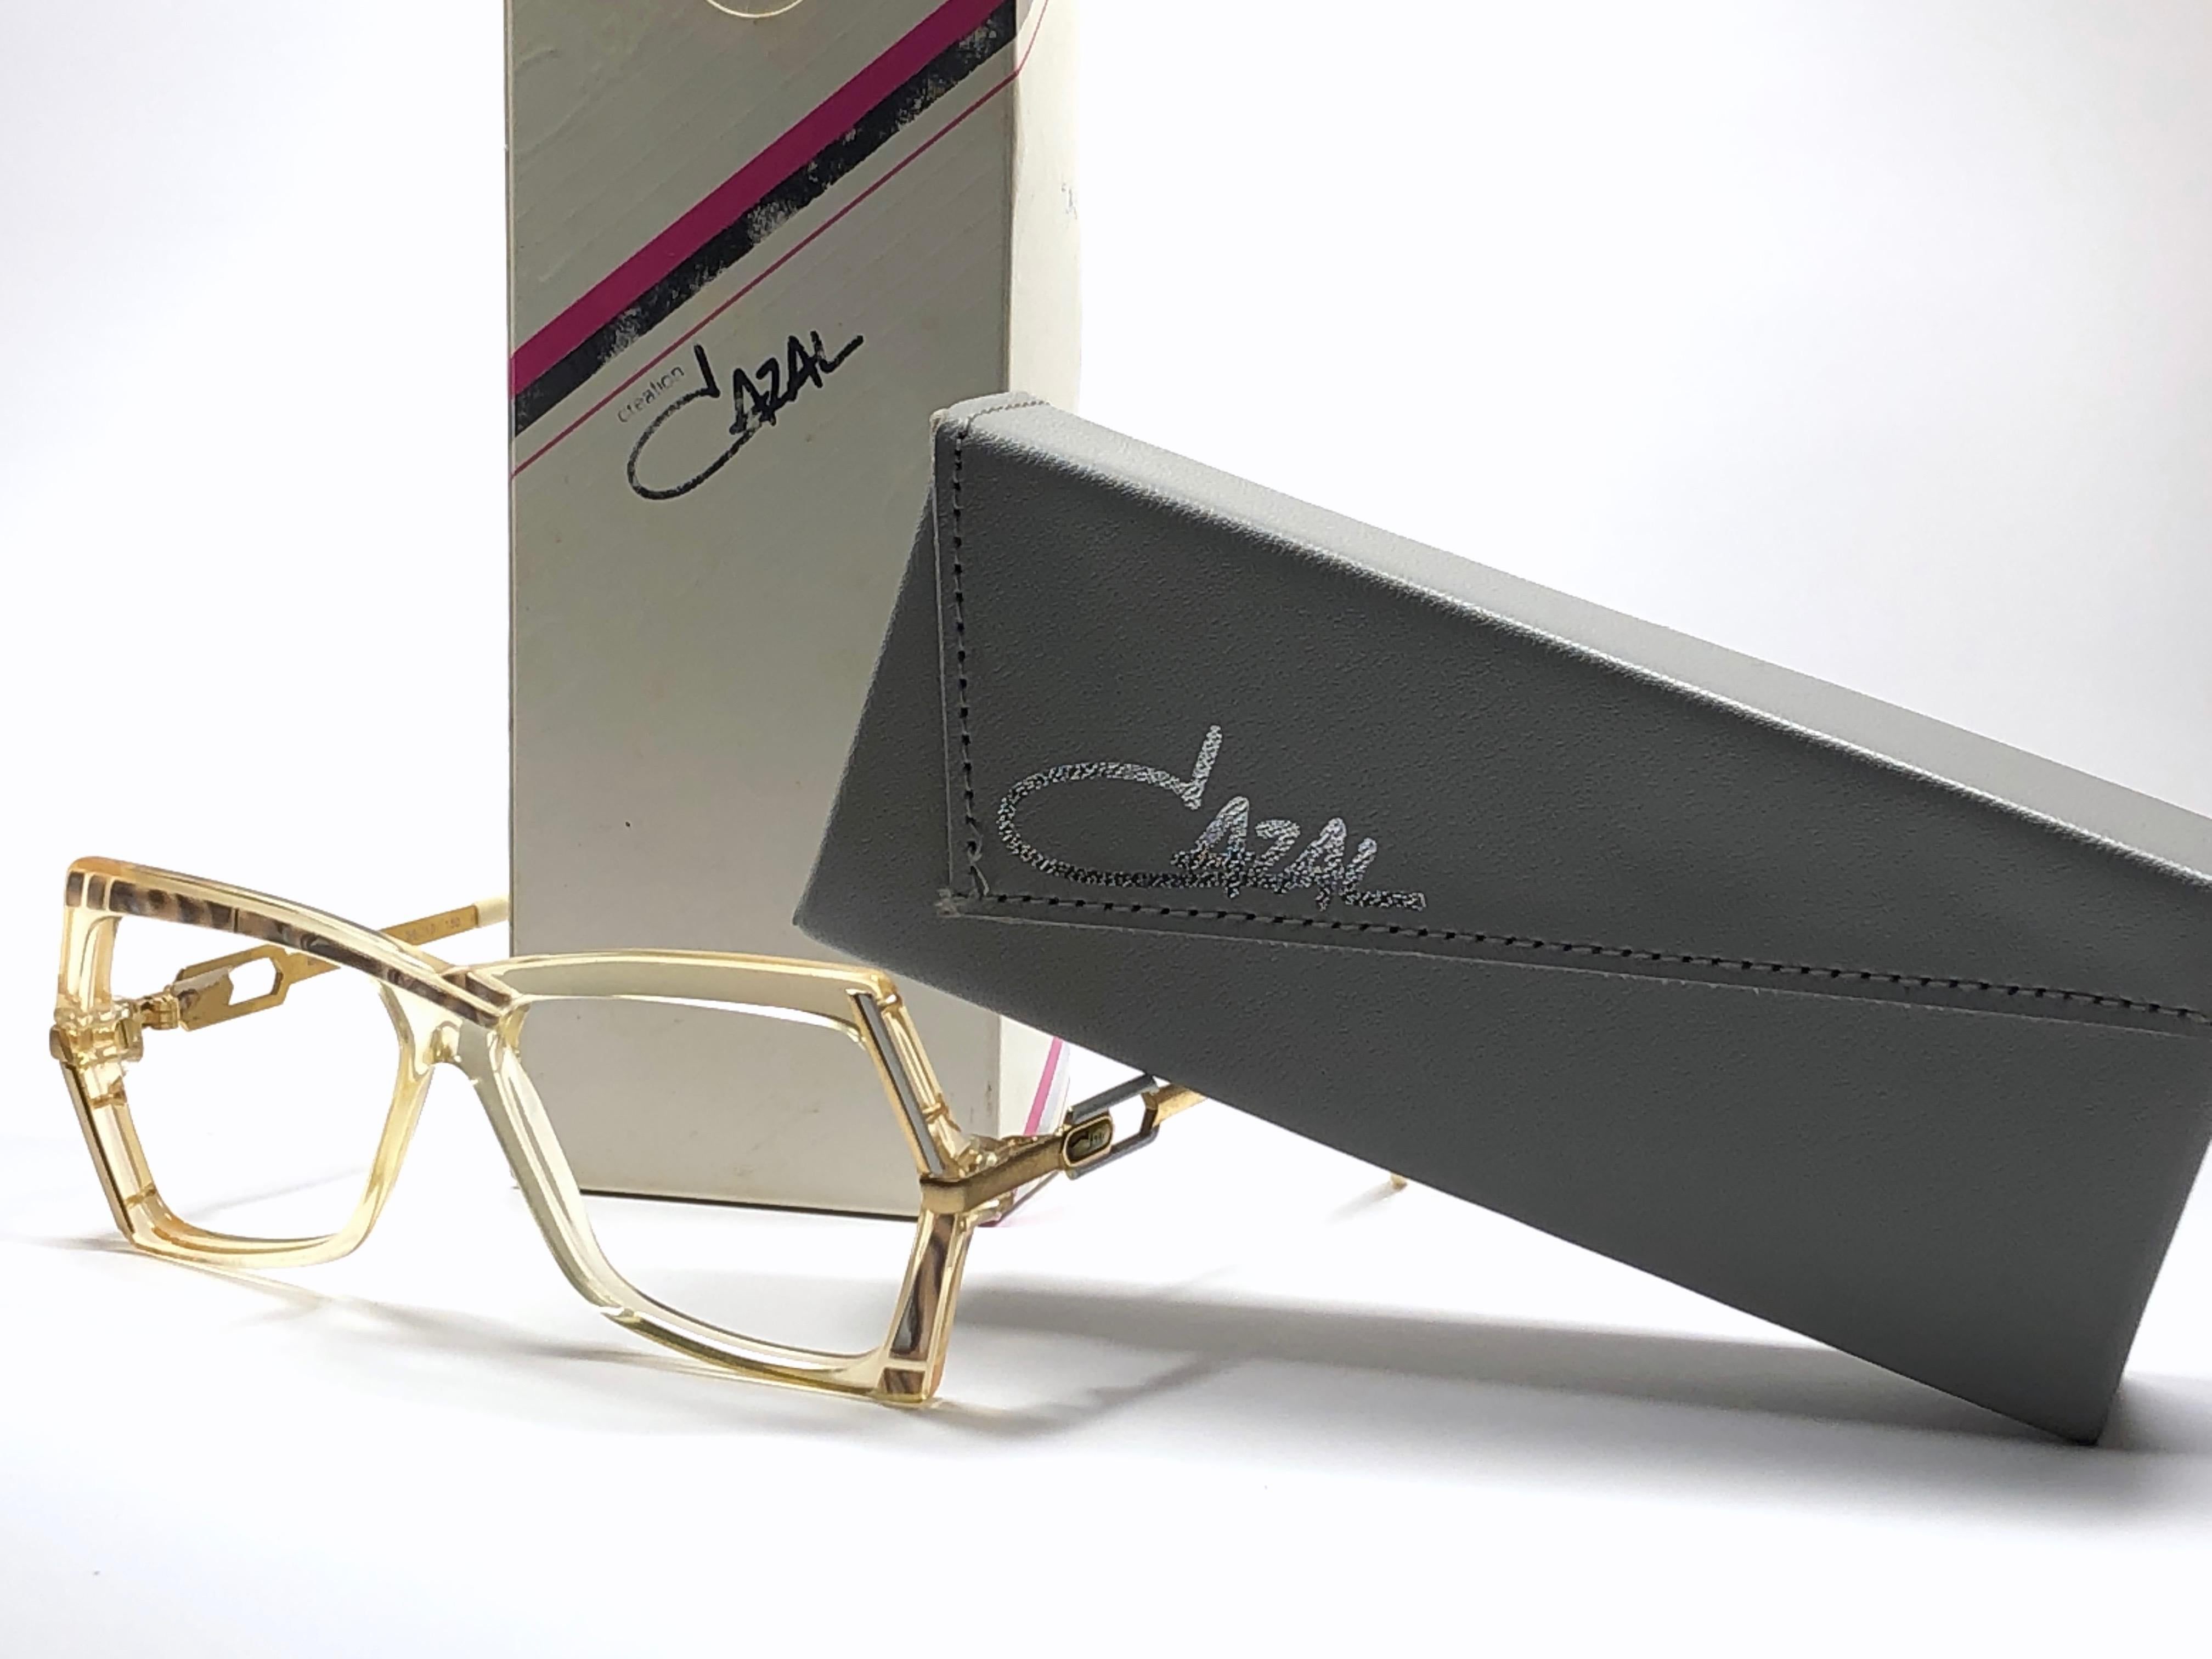 New Vintage Cazal 183 translucent with gold details frame. Perfect for reading spectacles. 

Comes with its original Cazal case. This item may show minor sign of wear due to storage.

Made in West Germany.